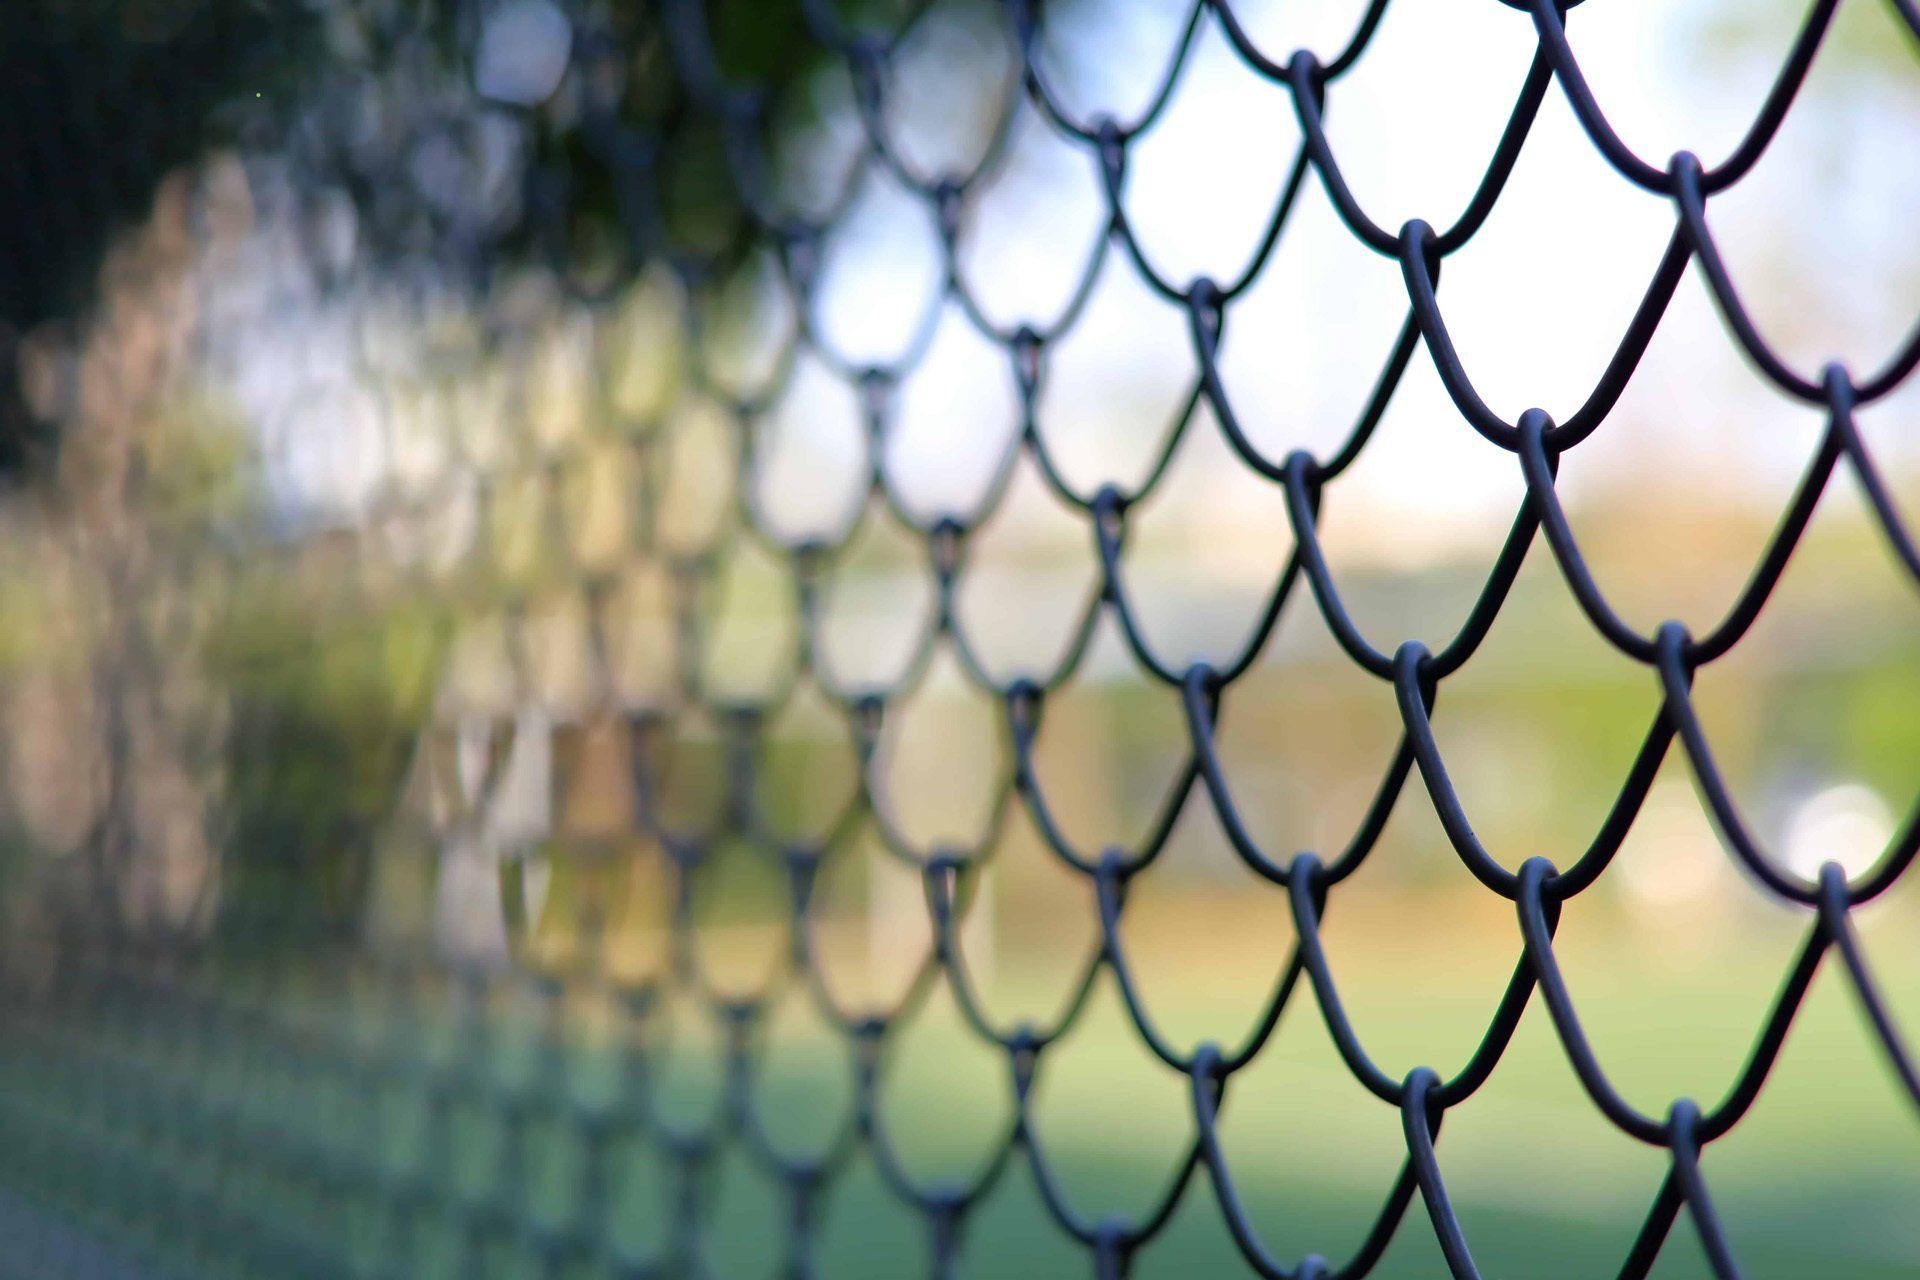 Chain link fencing fabric